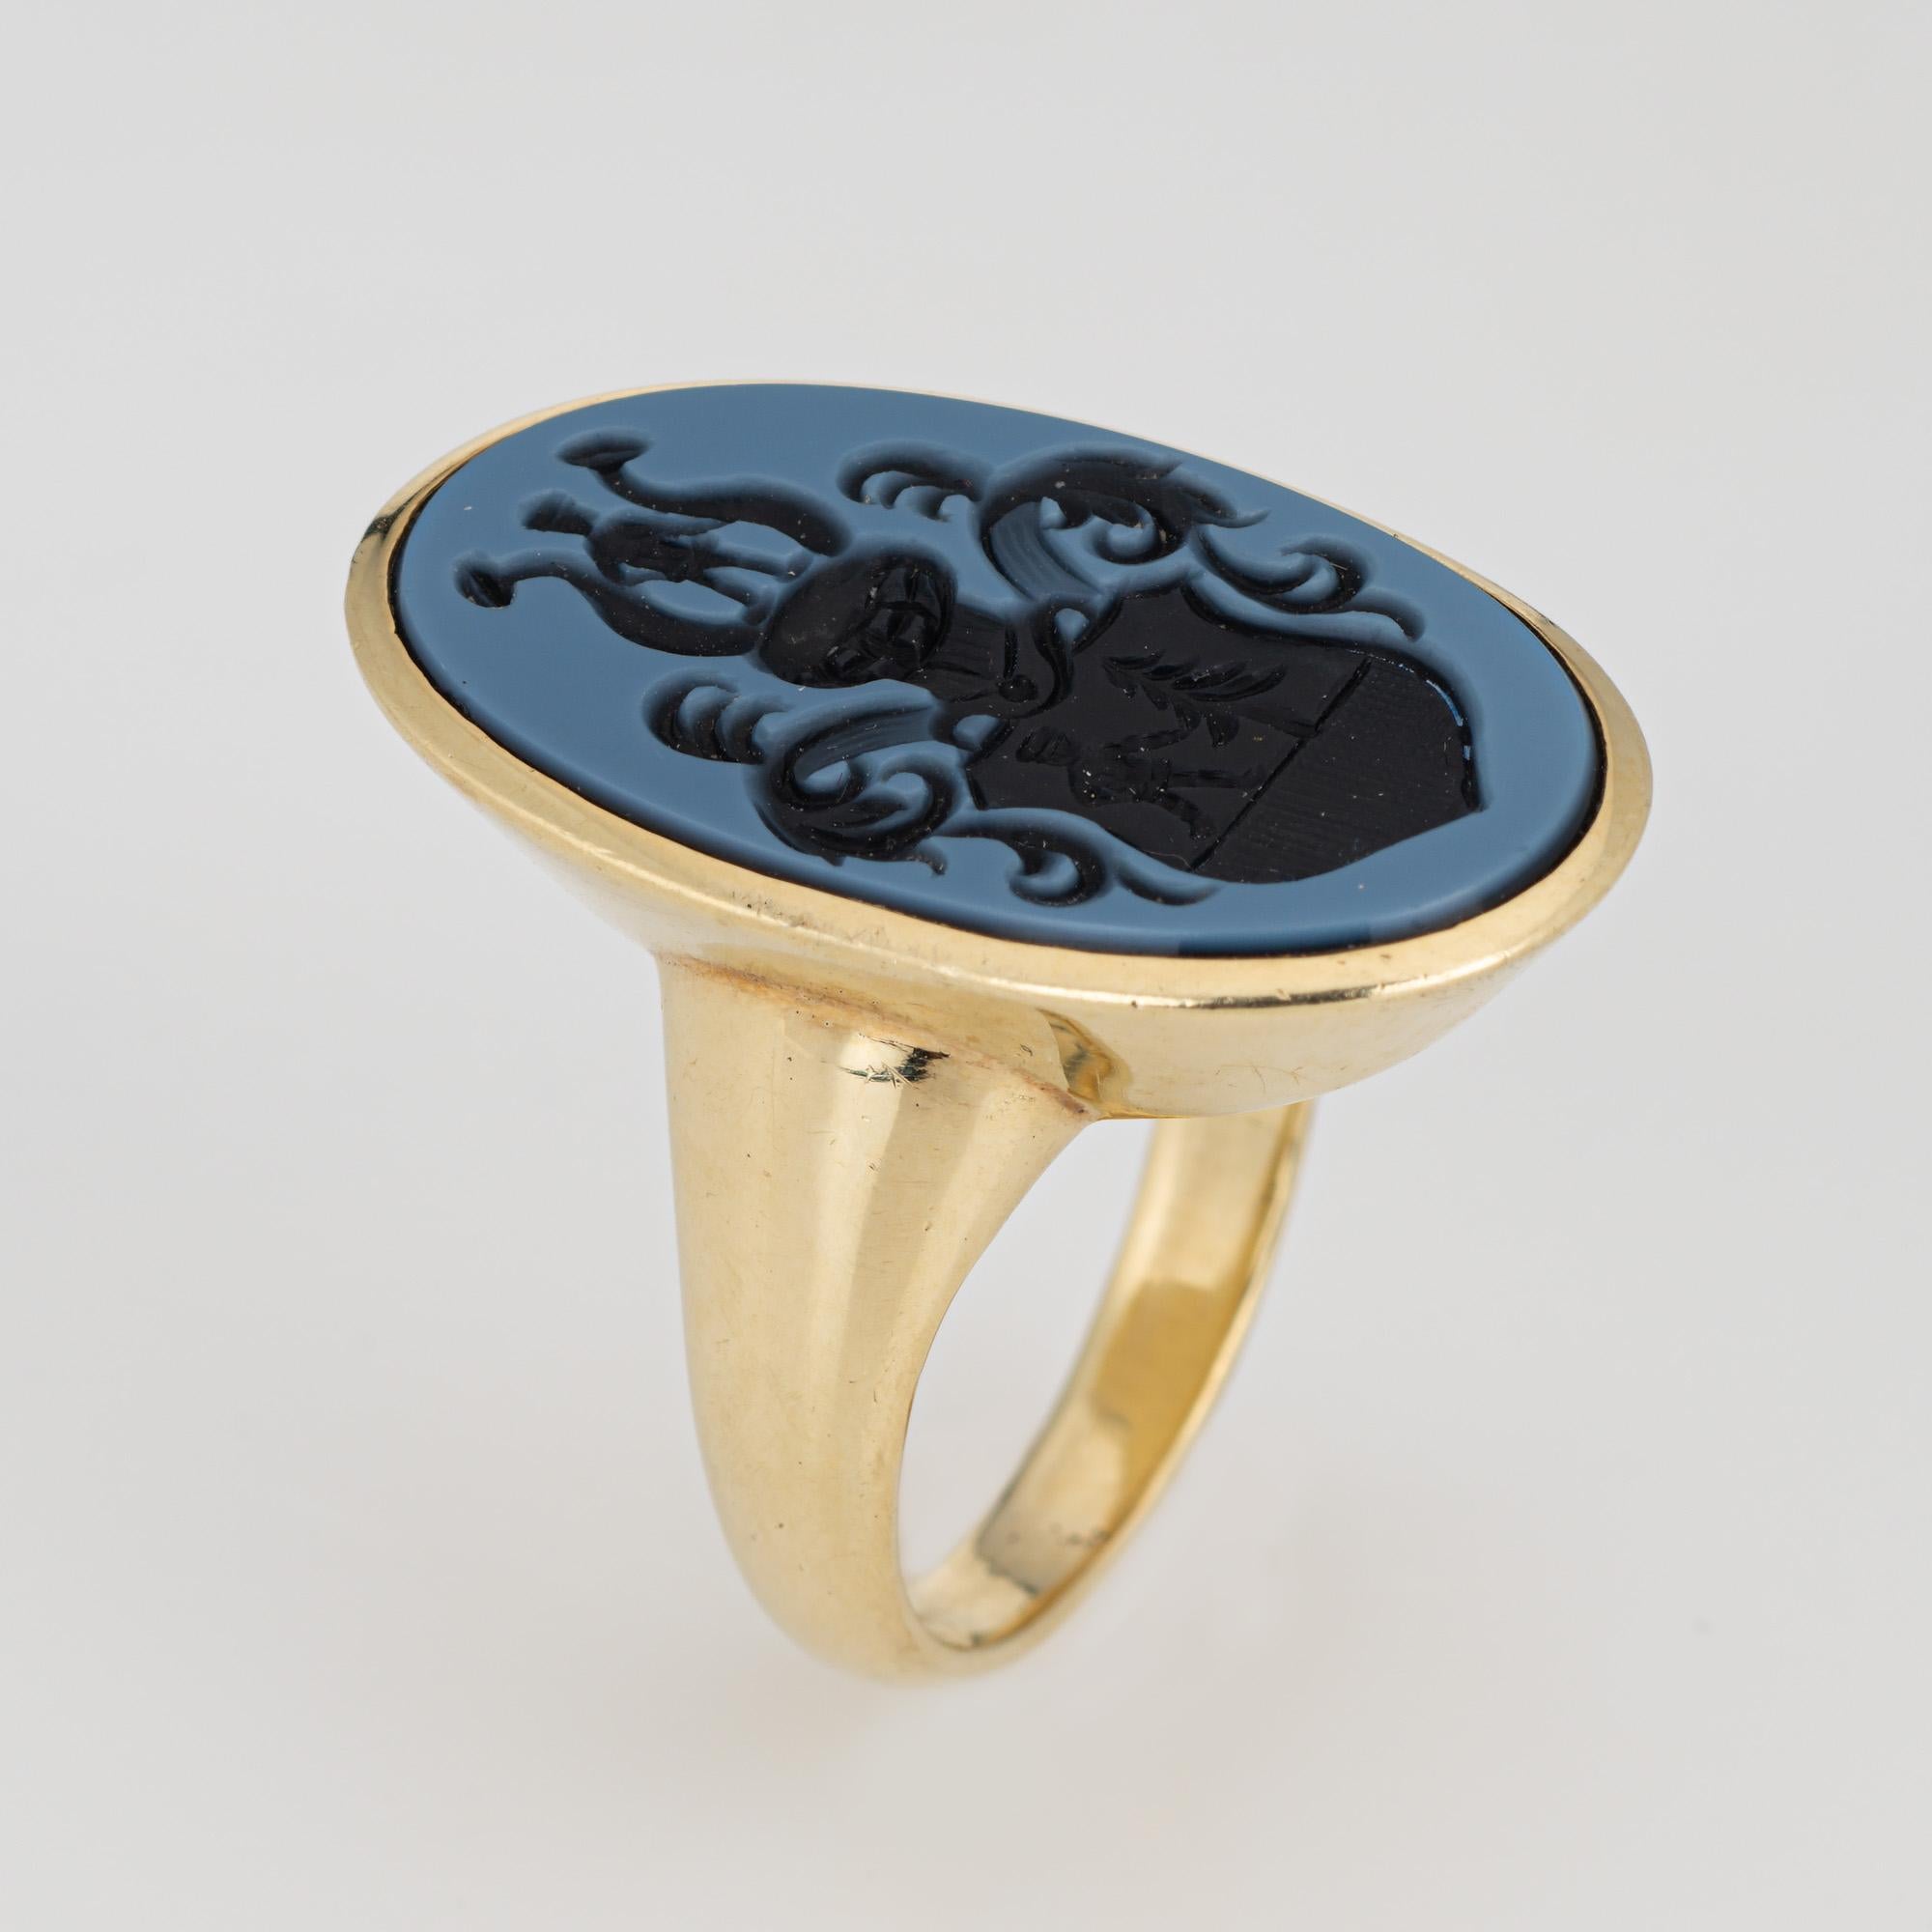 Stylish vintage family crest signet ring crafted in 14 karat yellow gold. 

Blue agate measures 24mm x 14mm. The agate is in very good condition and free of cracks or chips. 

Blue agate intaglio features an elaborate family crest. The long oval